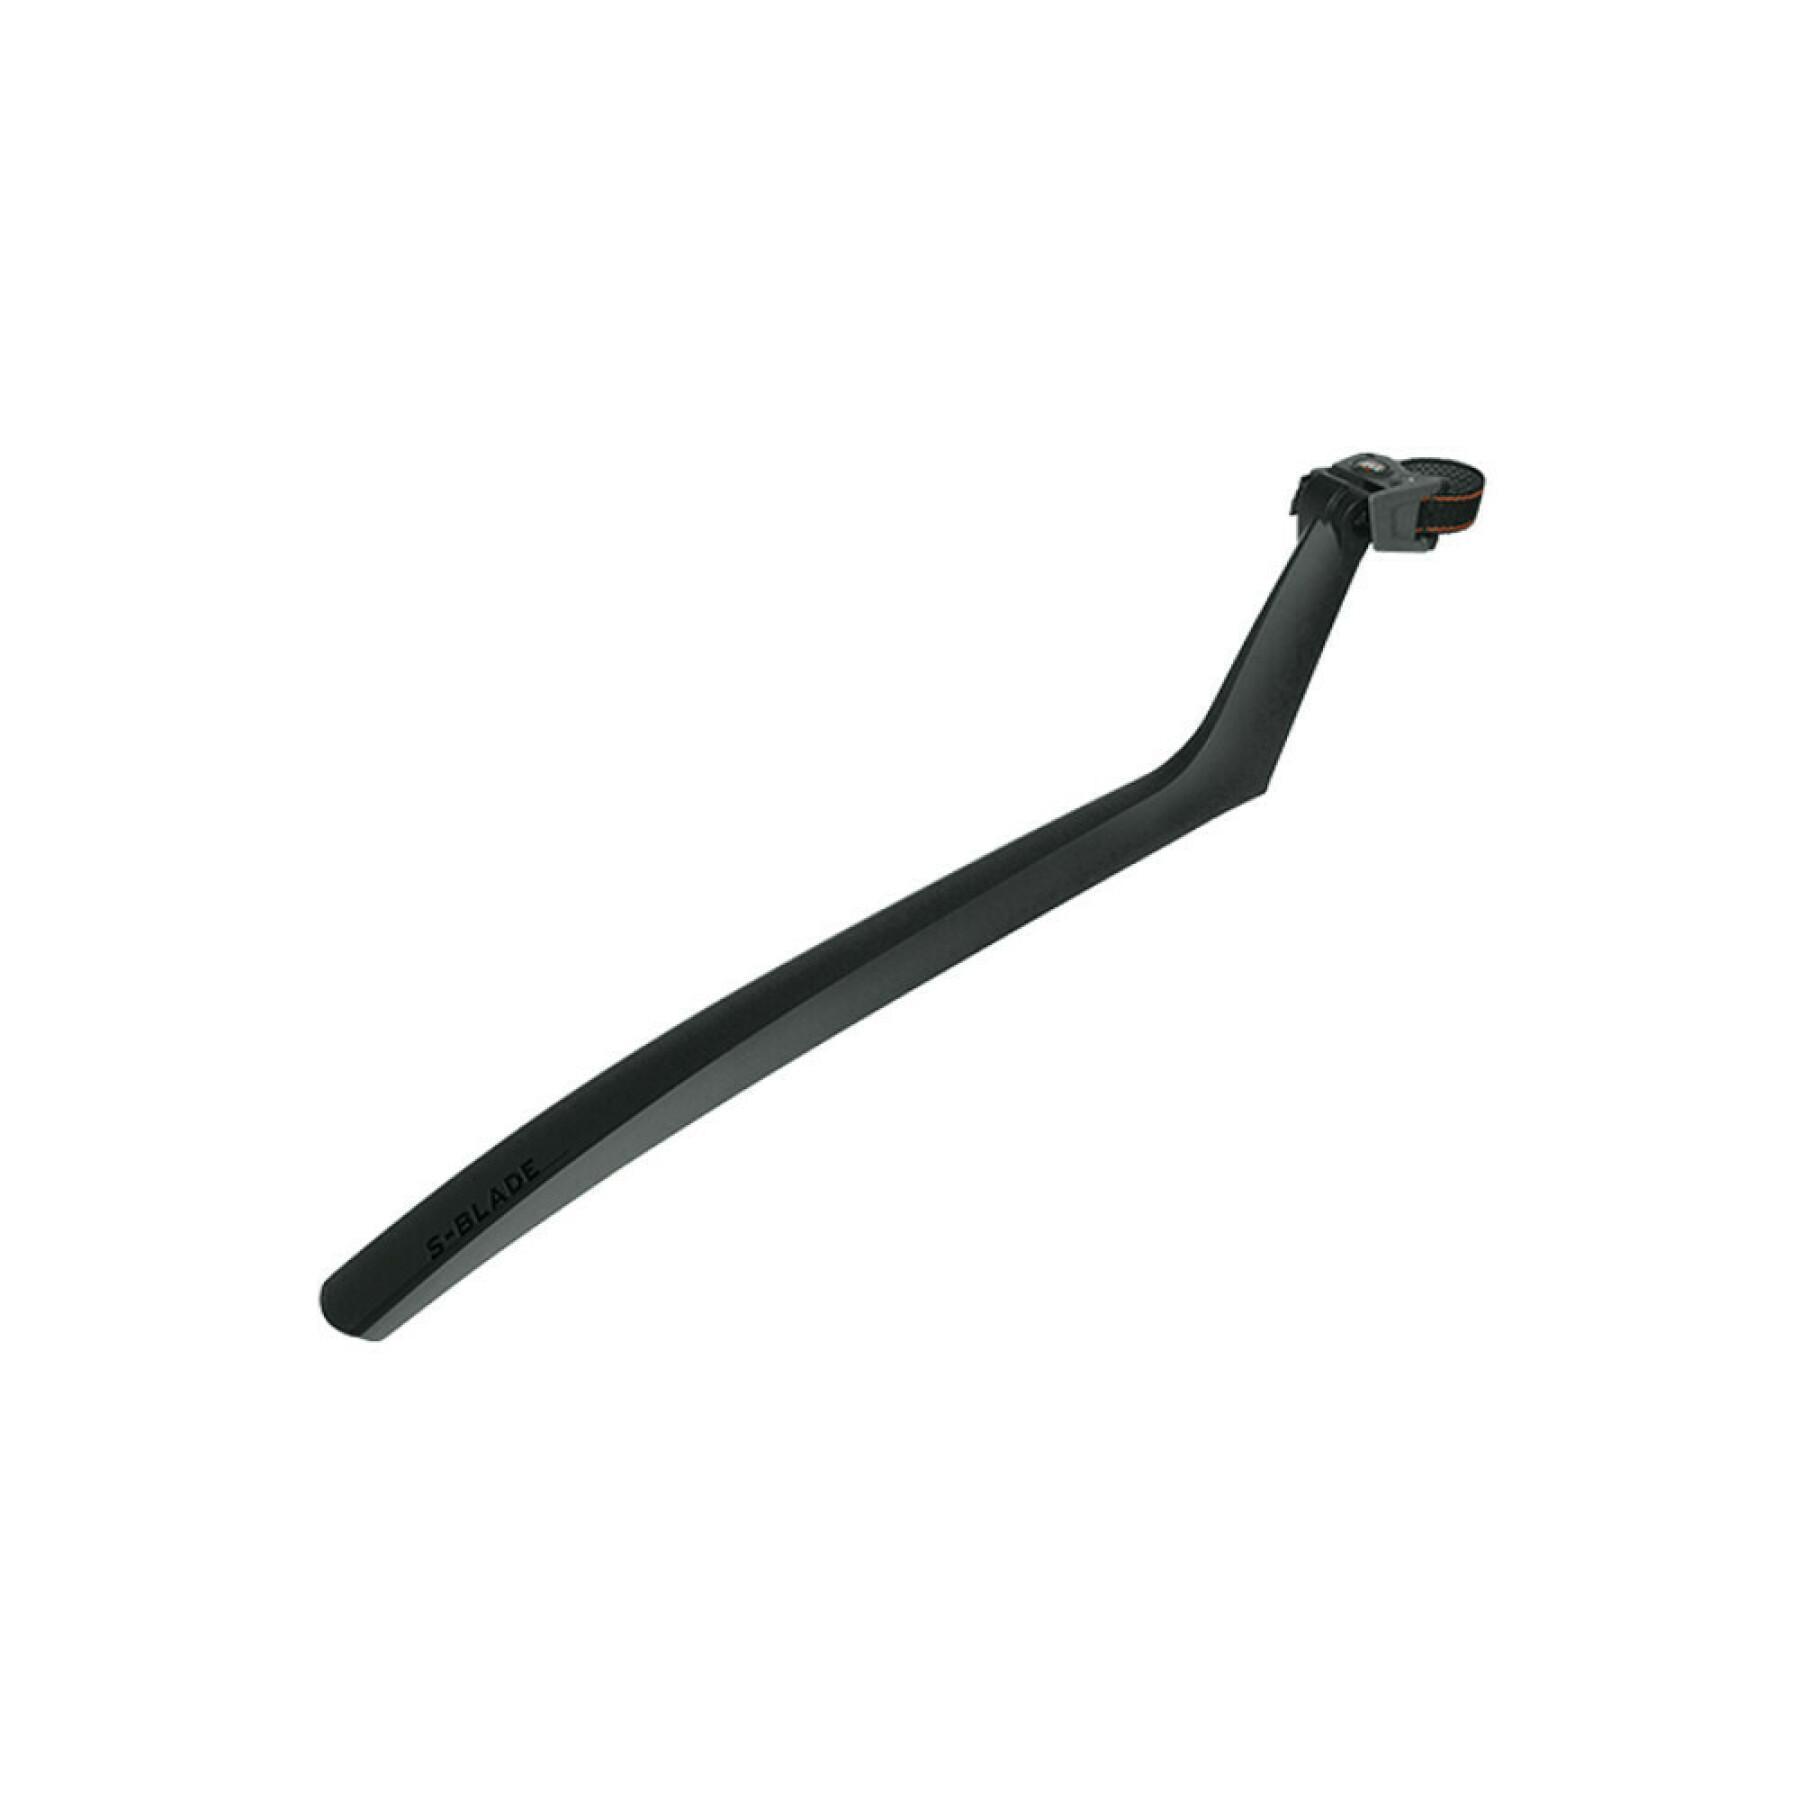 Mudguard at the seatpost SKS S-Blade 28